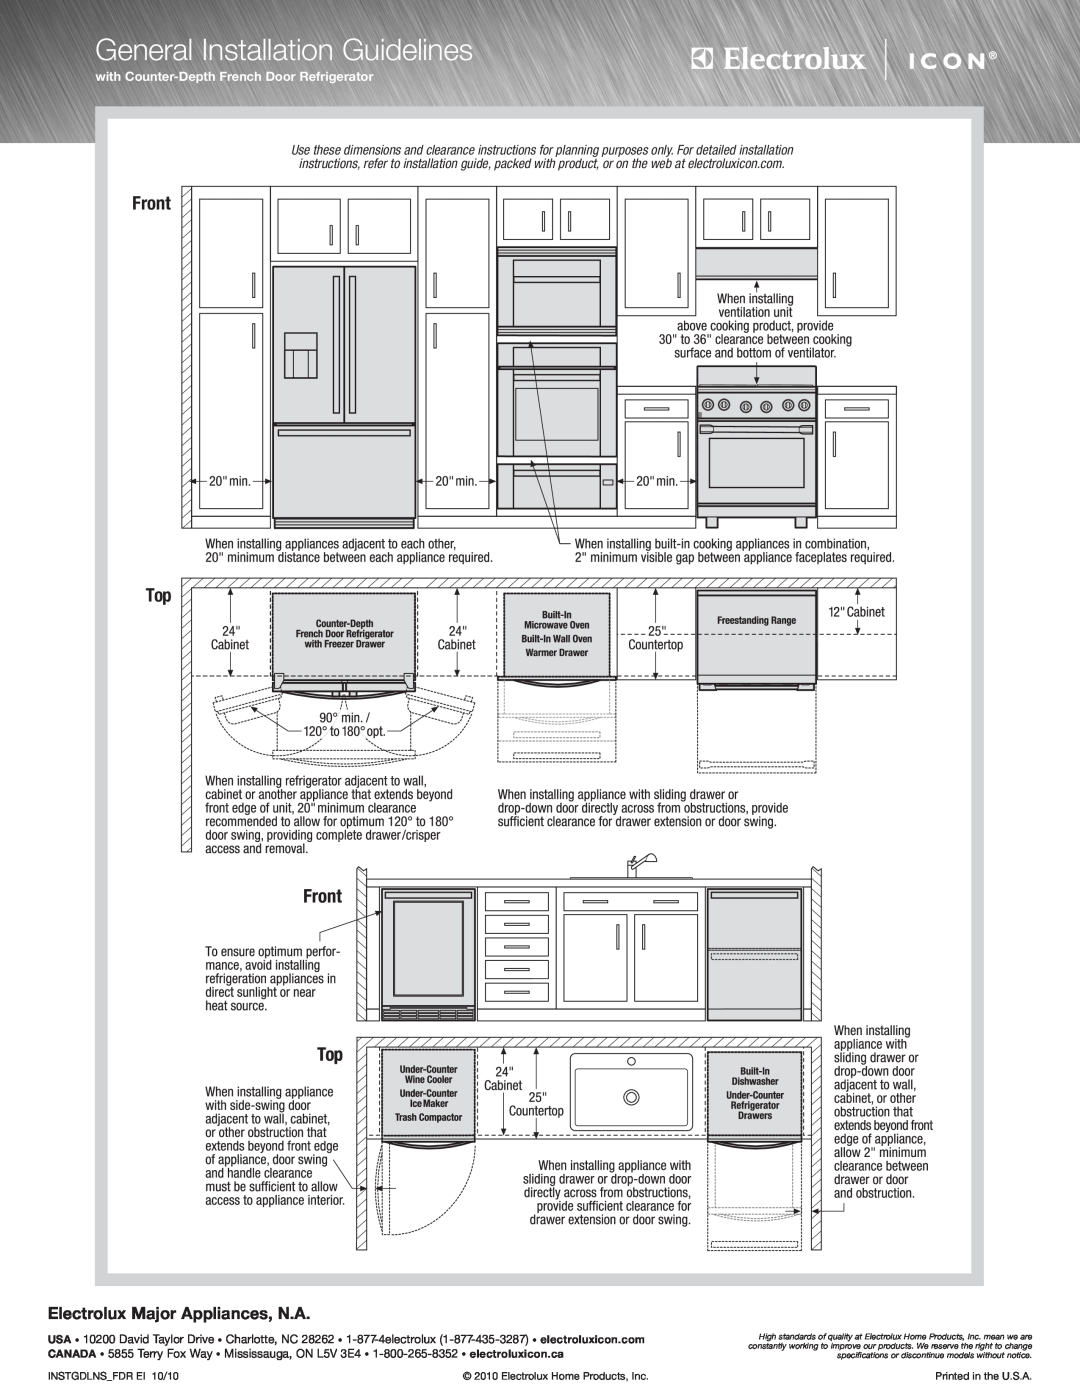 Electrolux E36GF76JPS specifications General Installation Guidelines, Electrolux Major Appliances, N.A, Front 